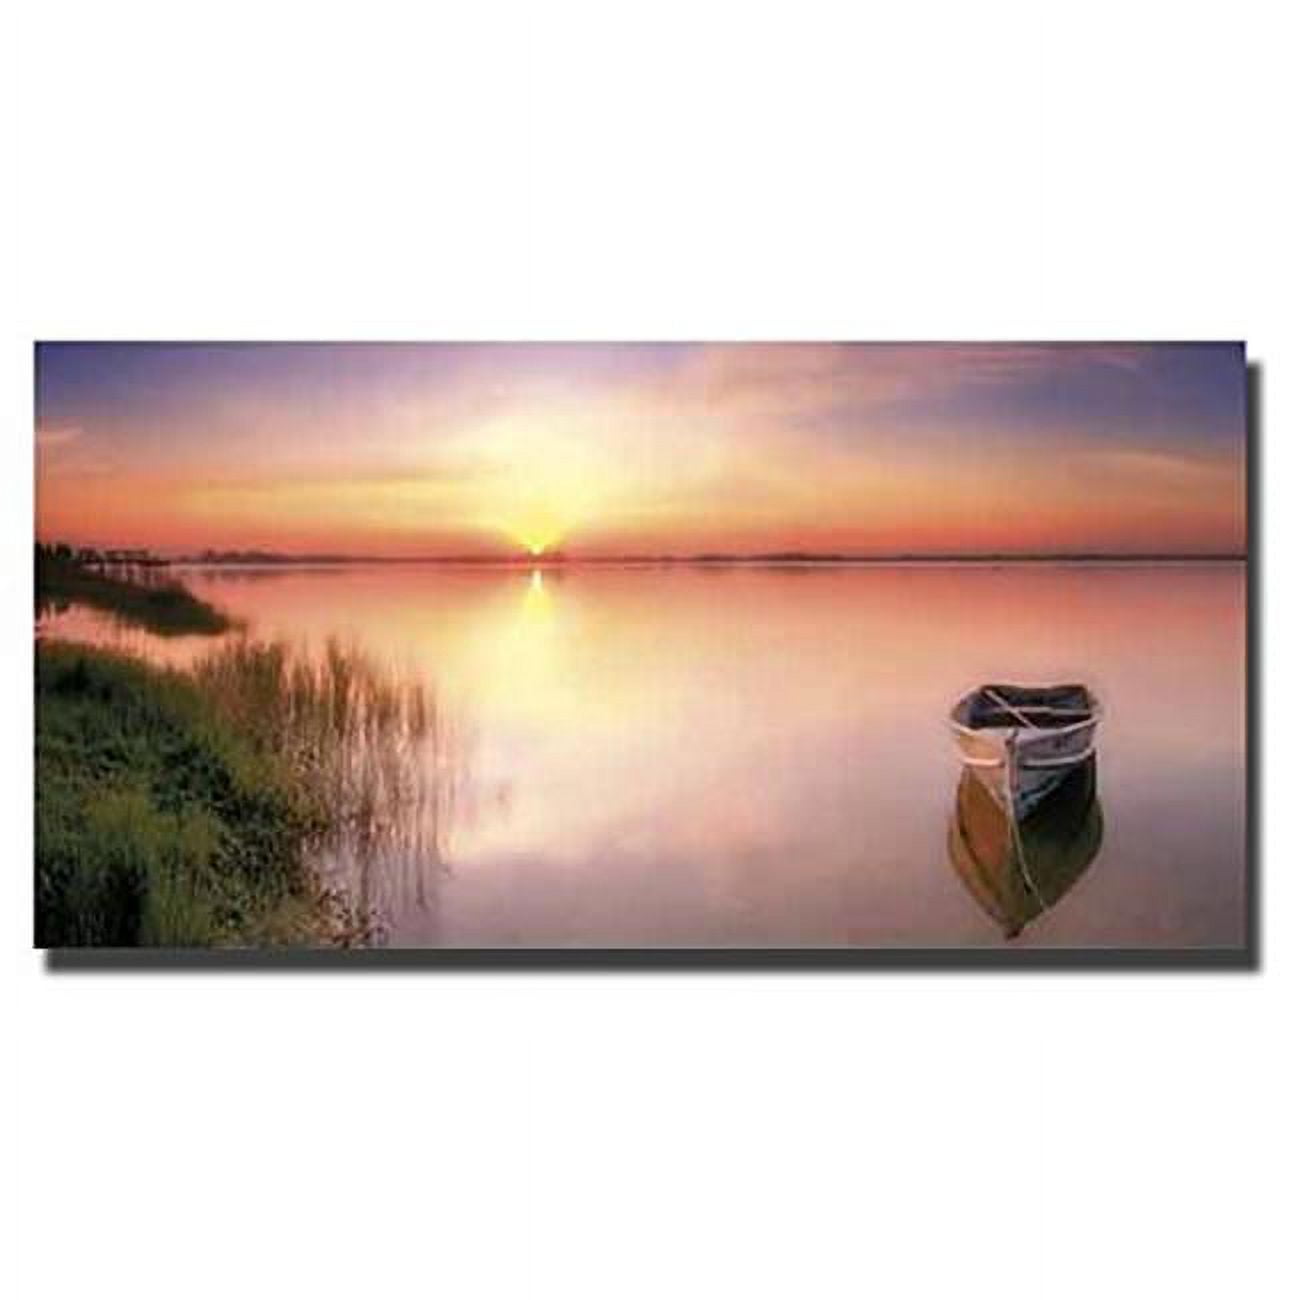 1224h709eg Beside Still Waters By Doug Cavanah Premium Gallery-wrapped Canvas Giclee Art - Ready To Hang, 12 X 24 X 1.5 In.